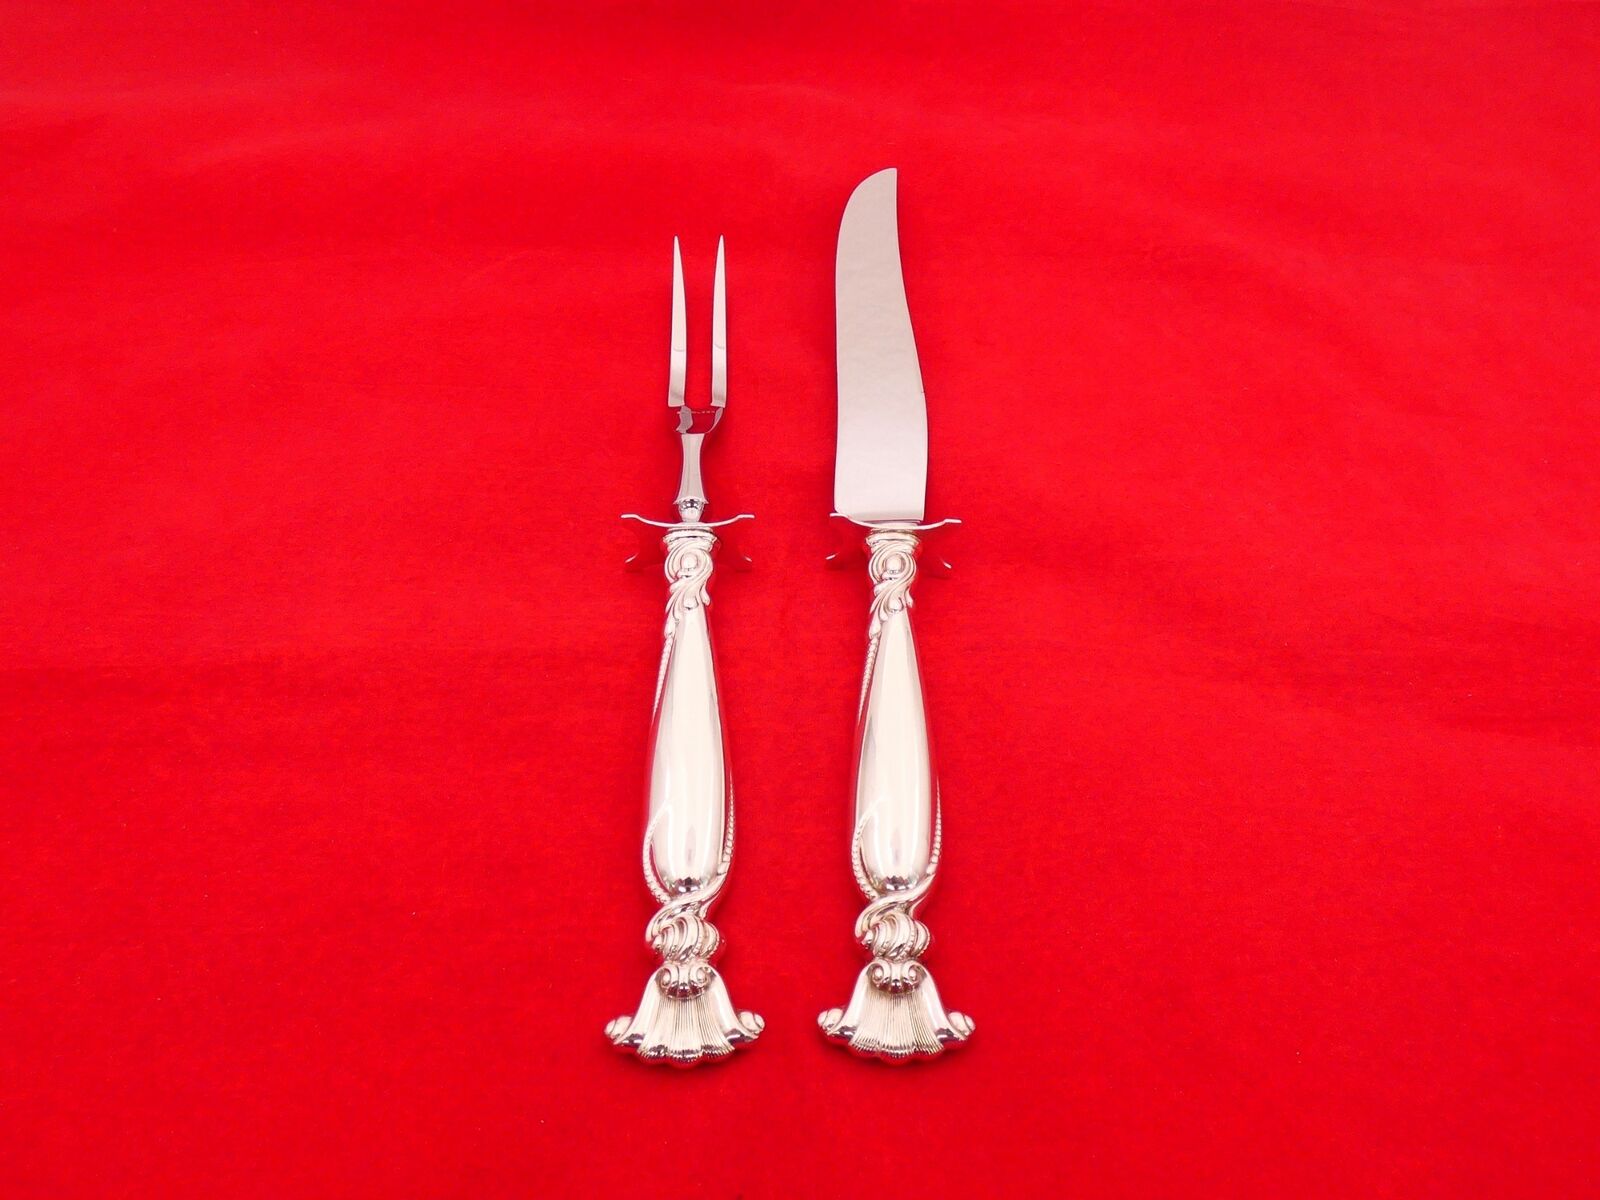 Wallace Sterling Silver Romance of the Sea 2 Piece Carving Set RF-23